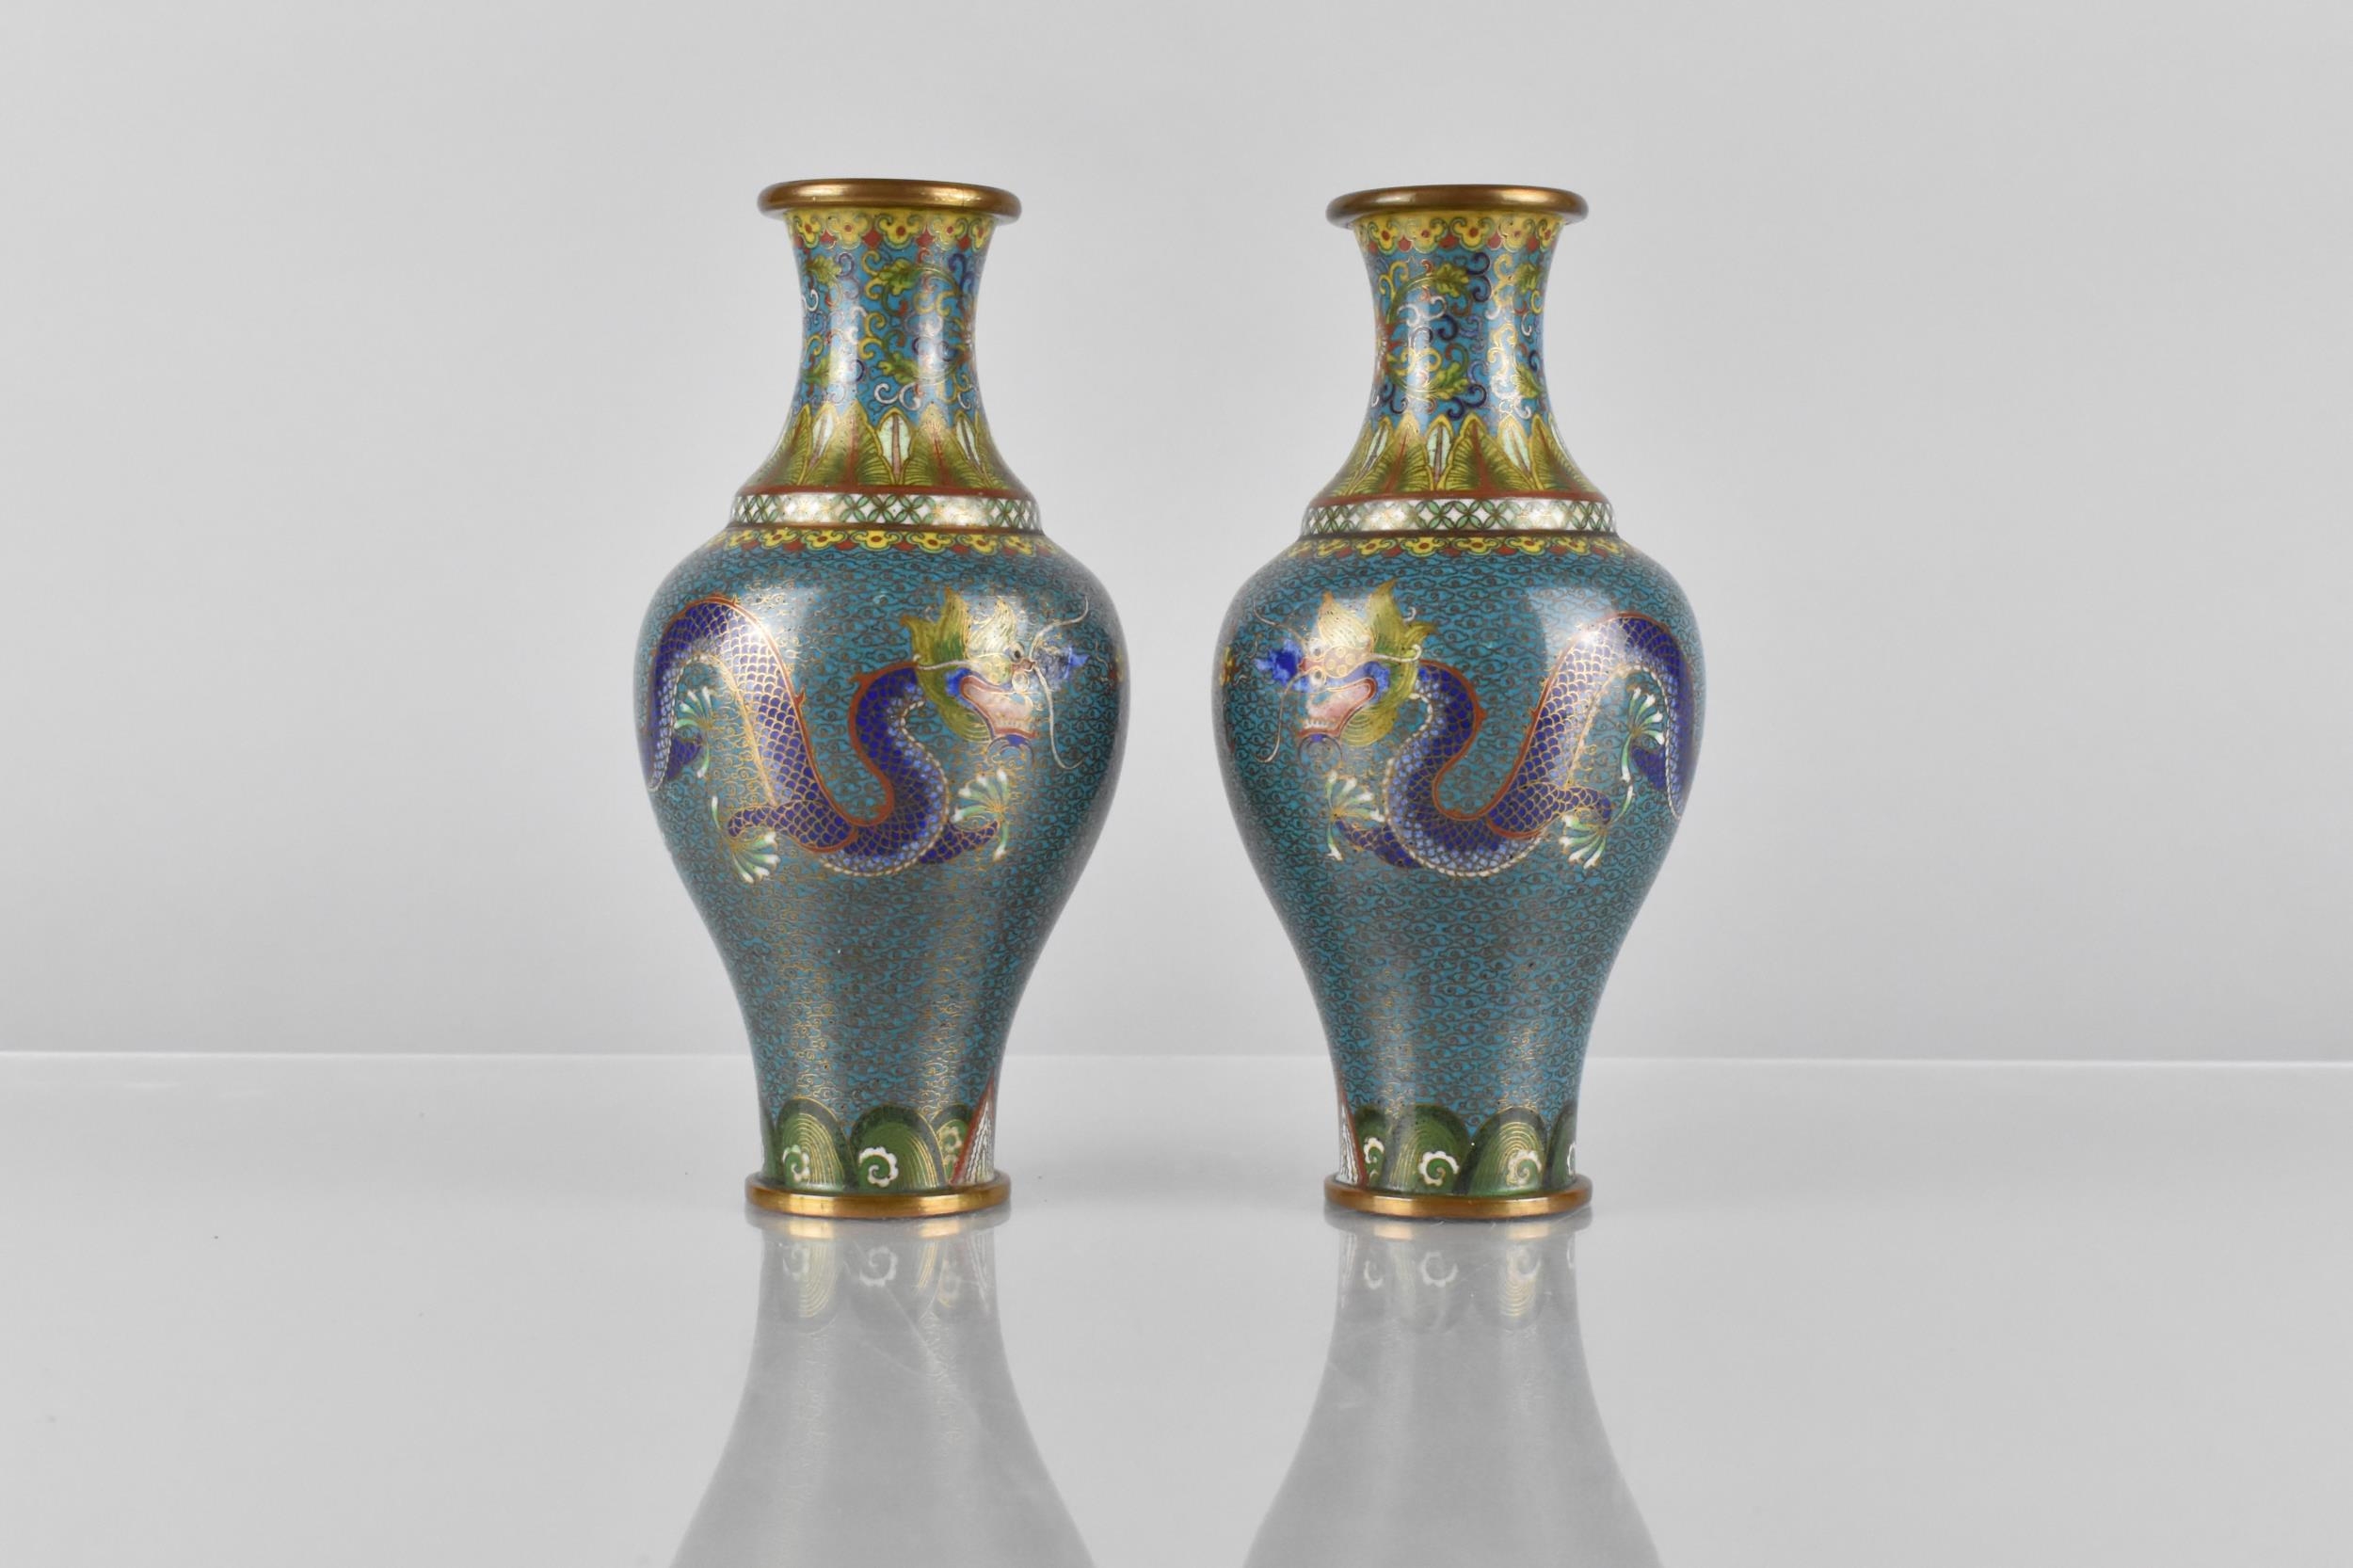 A Pair of Early/Mid 20th Century Chinese Cloisonne Vase Of Baluster Form and Flared Neck Decorated